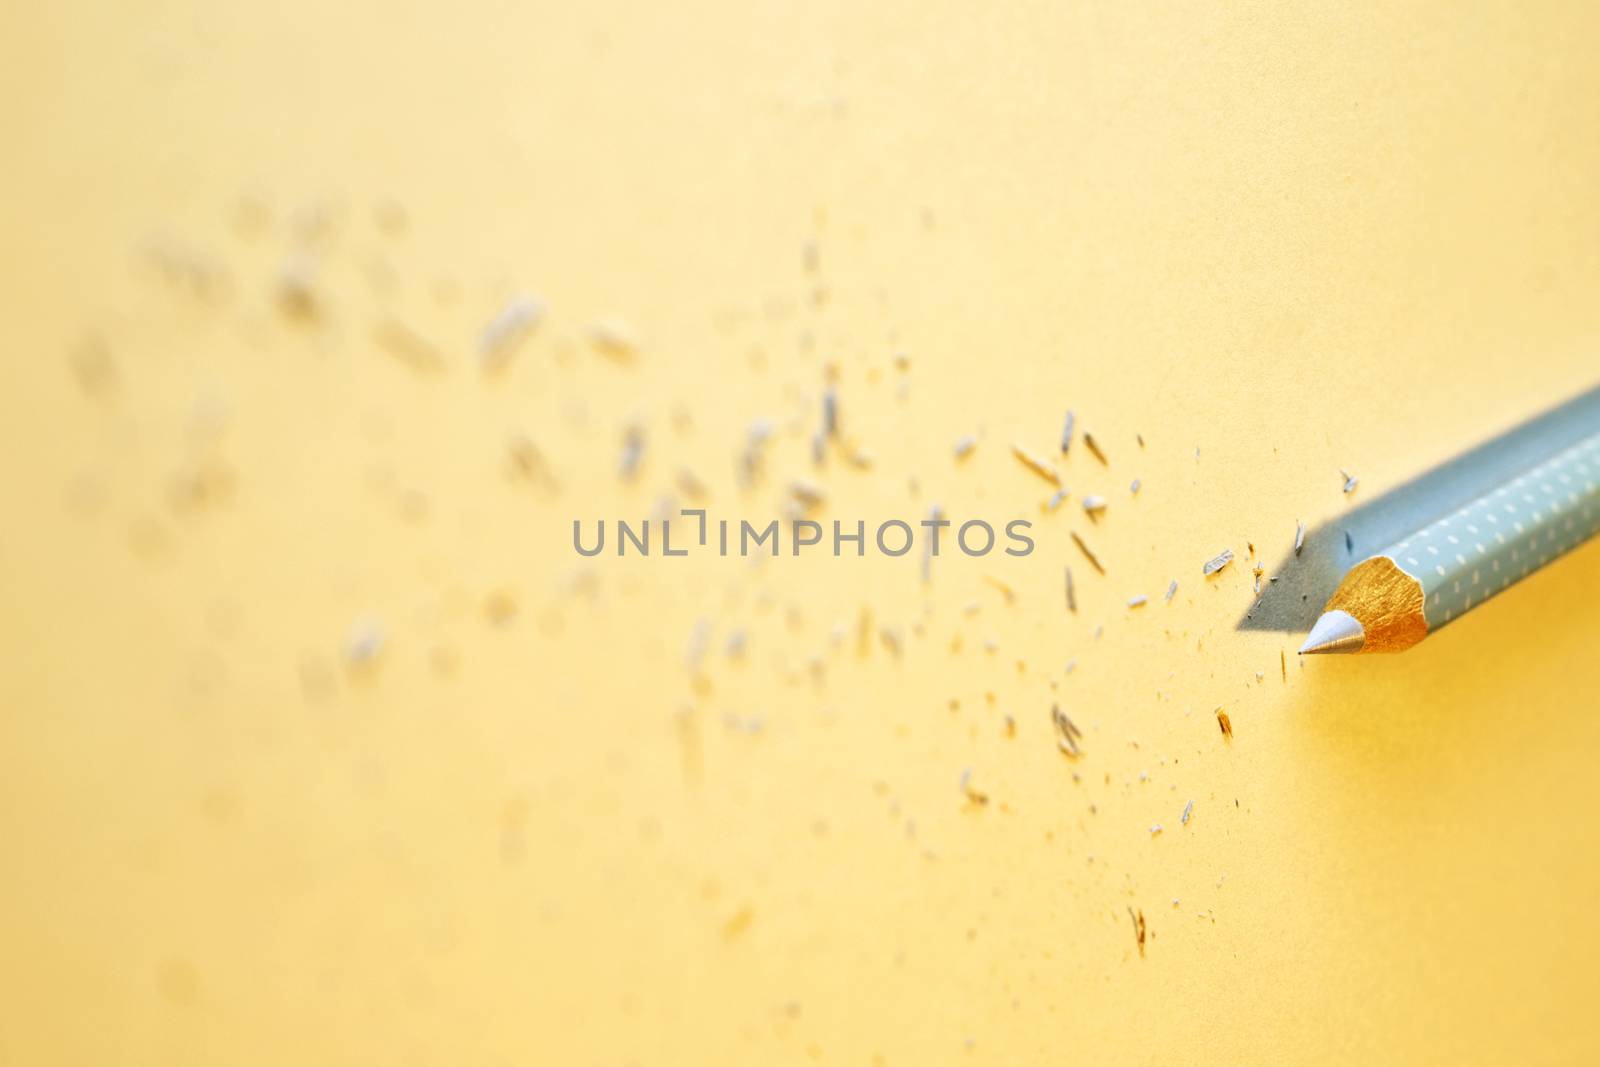  Sharpened wooden pencil on yellow background , beautiful pencil shavings all around 